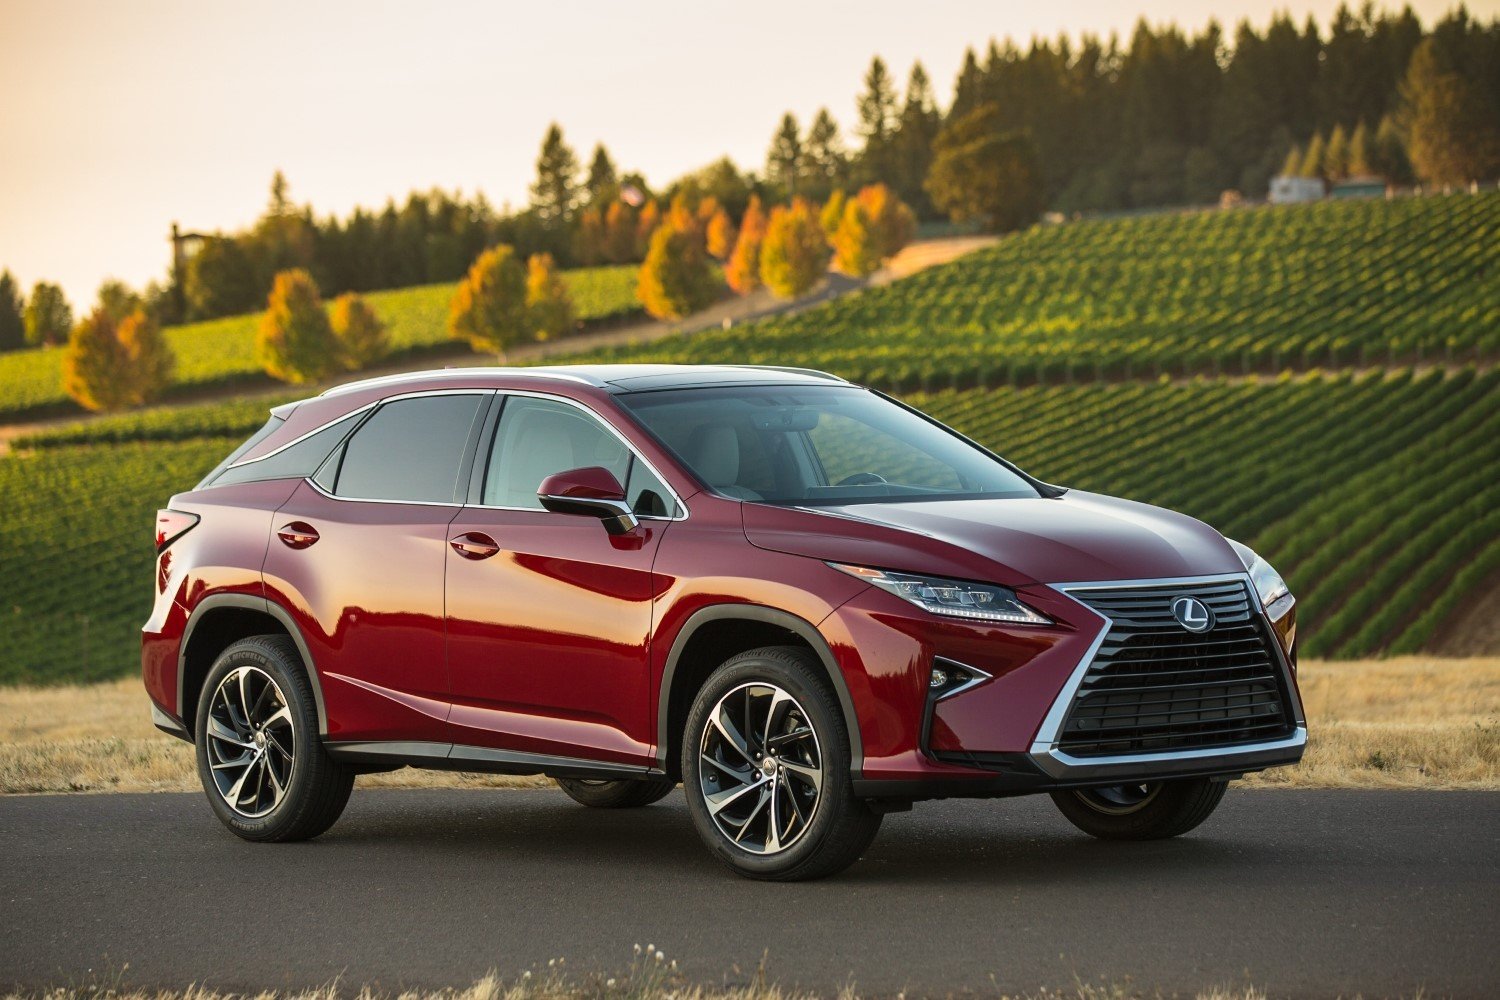 2019 Lexus RX350L SUV Specs, Review, and Pricing | CarSession